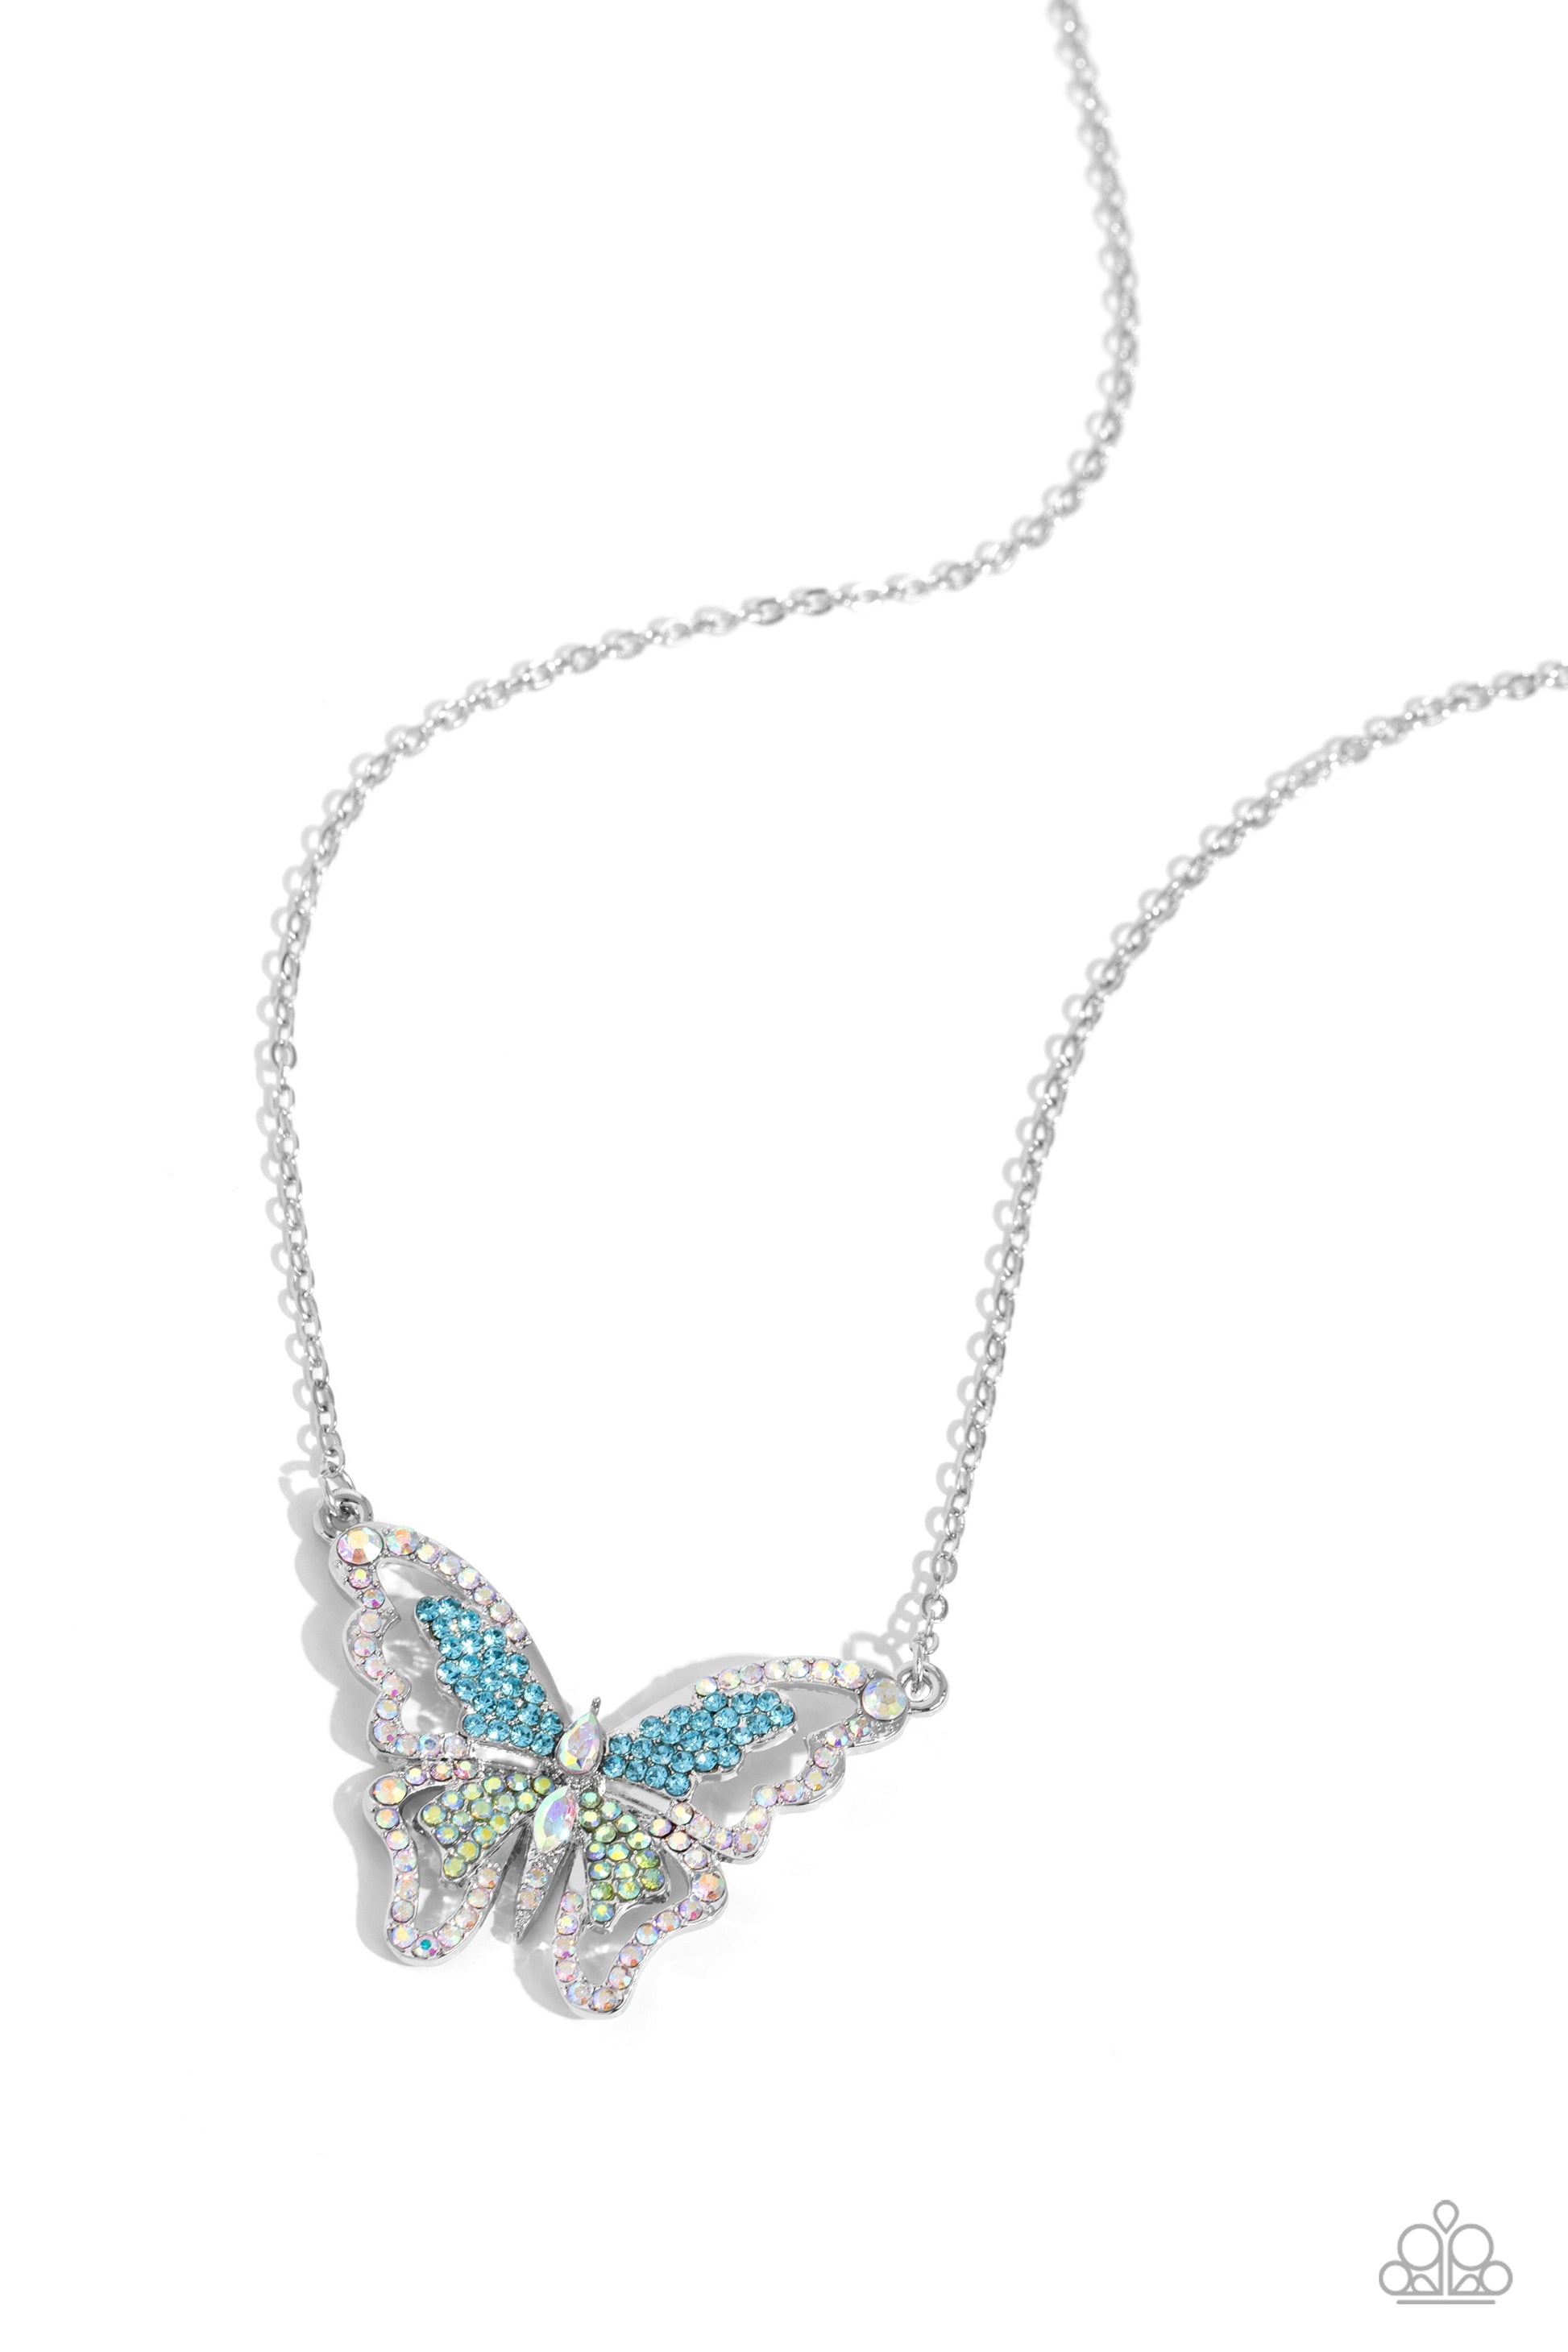 Paparazzi Accessories - Weekend WINGS - Multi Necklaces bordered in glassy iridescent rhinestones, an airy, oversized silver butterfly is dotted in dainty green and blue rhinestones in various cuts as it flutters from a silver chain below the collar for an enchanting fashion. Features an adjustable clasp closure. Due to its prismatic palette, color may vary. Sold as one individual necklace. Includes one pair of matching earrings.